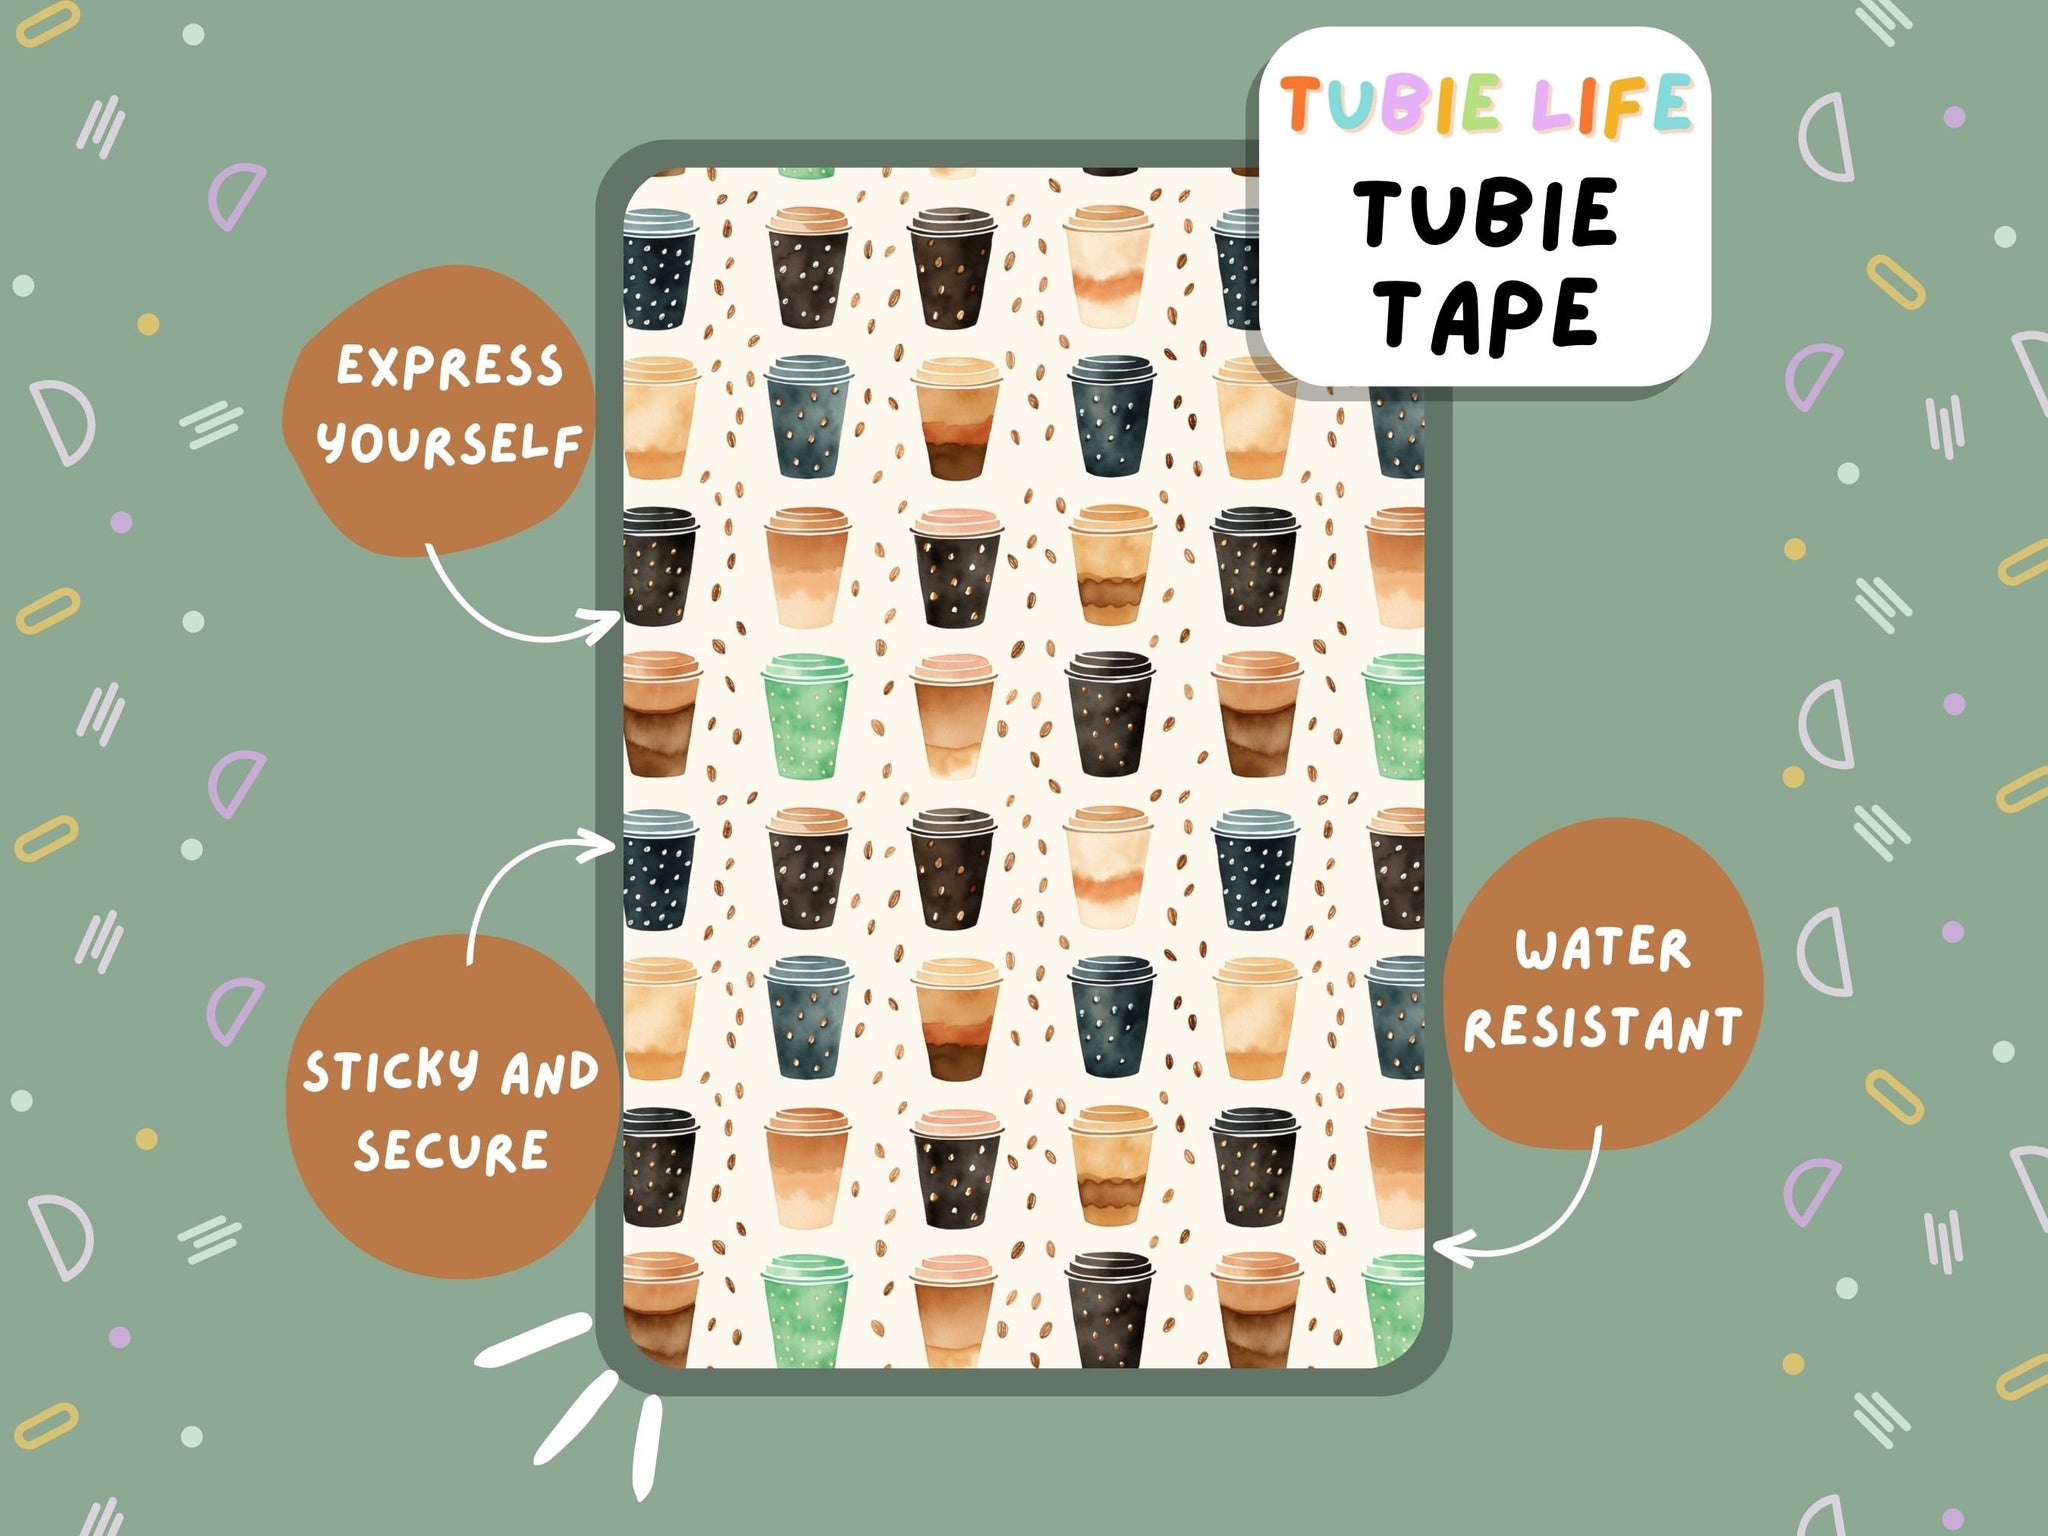 TUBIE TAPE Tubie Life coffee cups ng tube tape for feeding tubes and other tubing Full Sheet